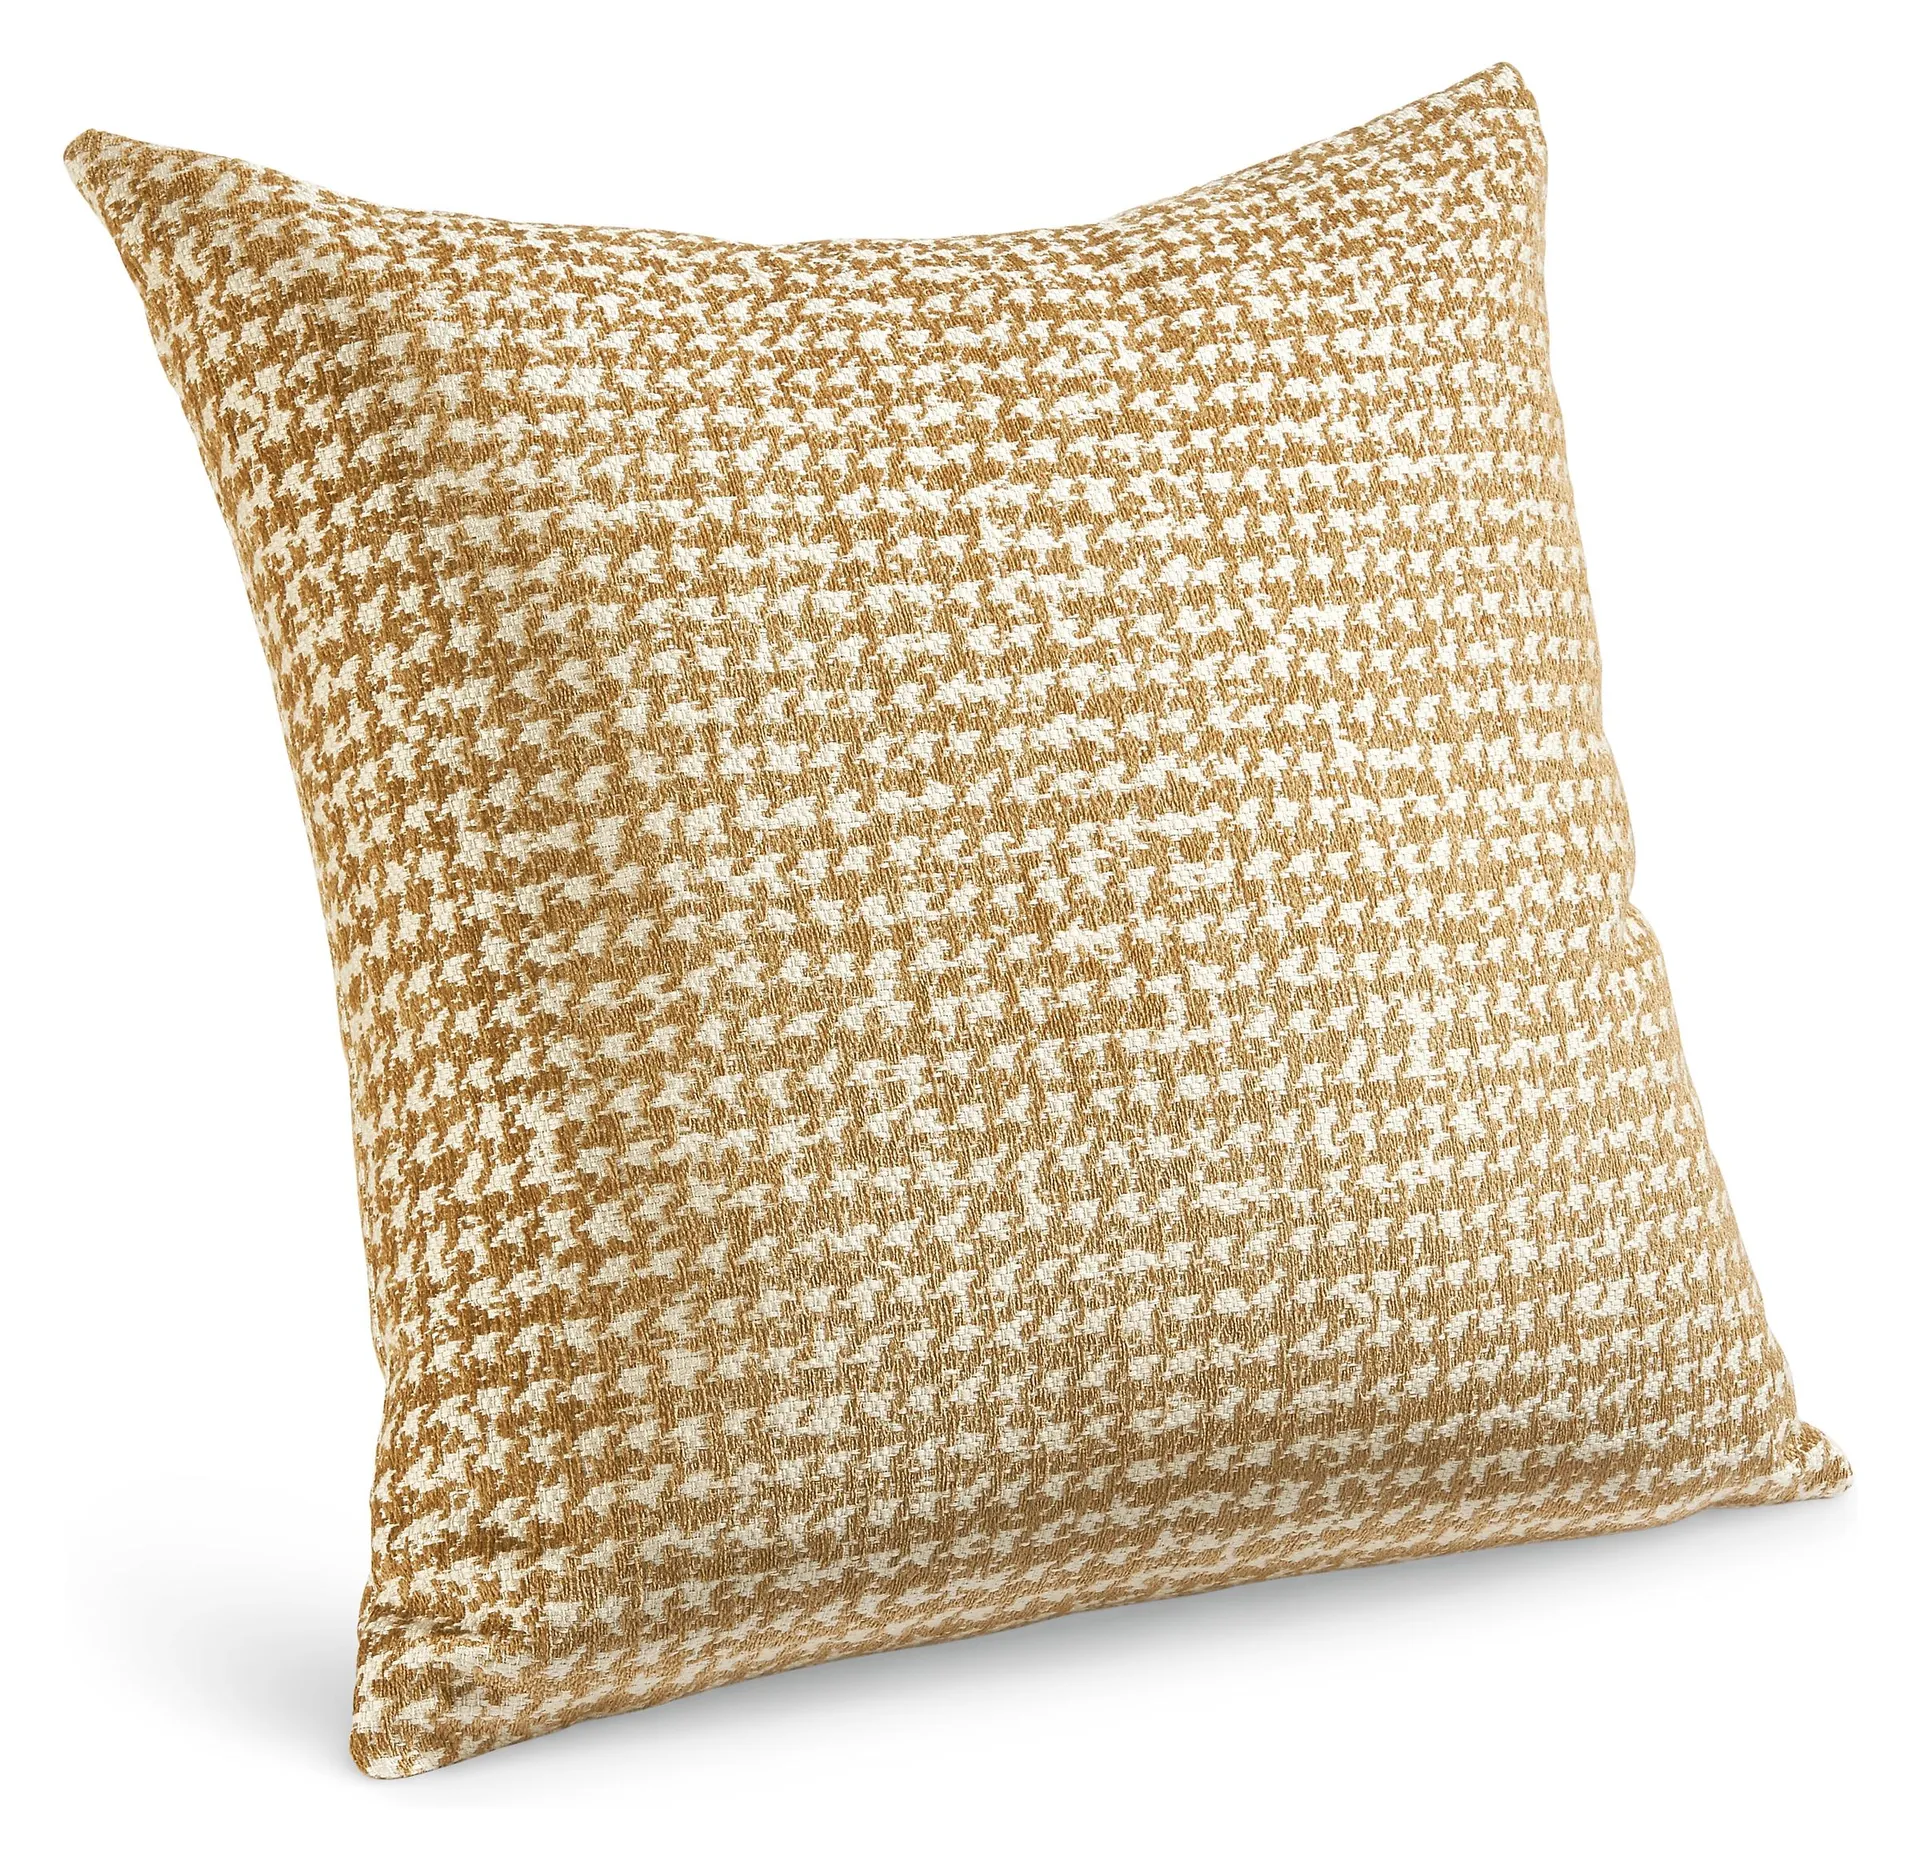 Barnes 24w 24h Throw Pillow in Camel/White with Down Insert